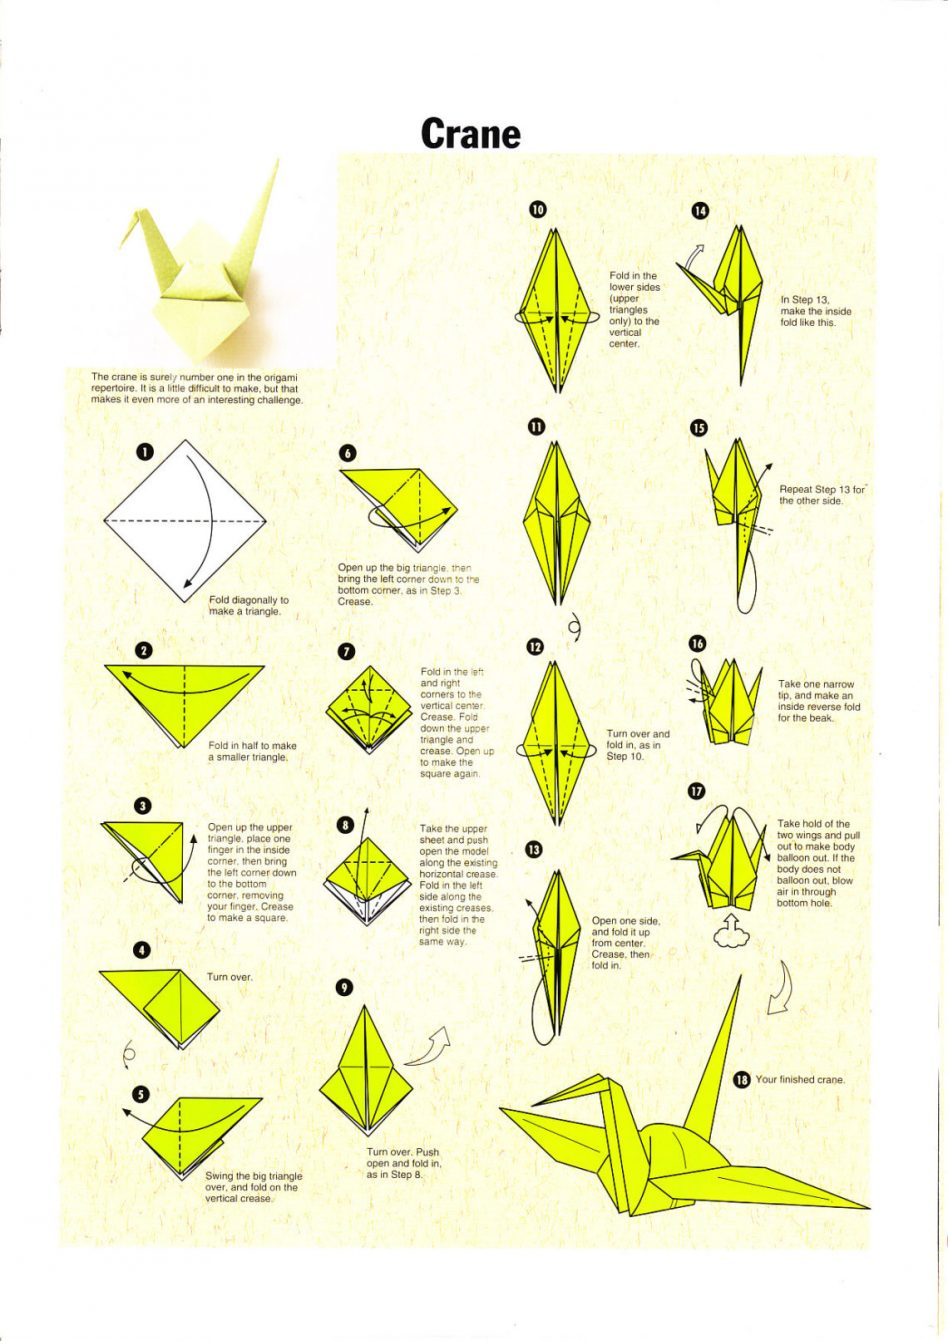 Origami Crane Step By Step Instructions 21 Divine Steps How To Make An Origami Crane Tutorial In 2019